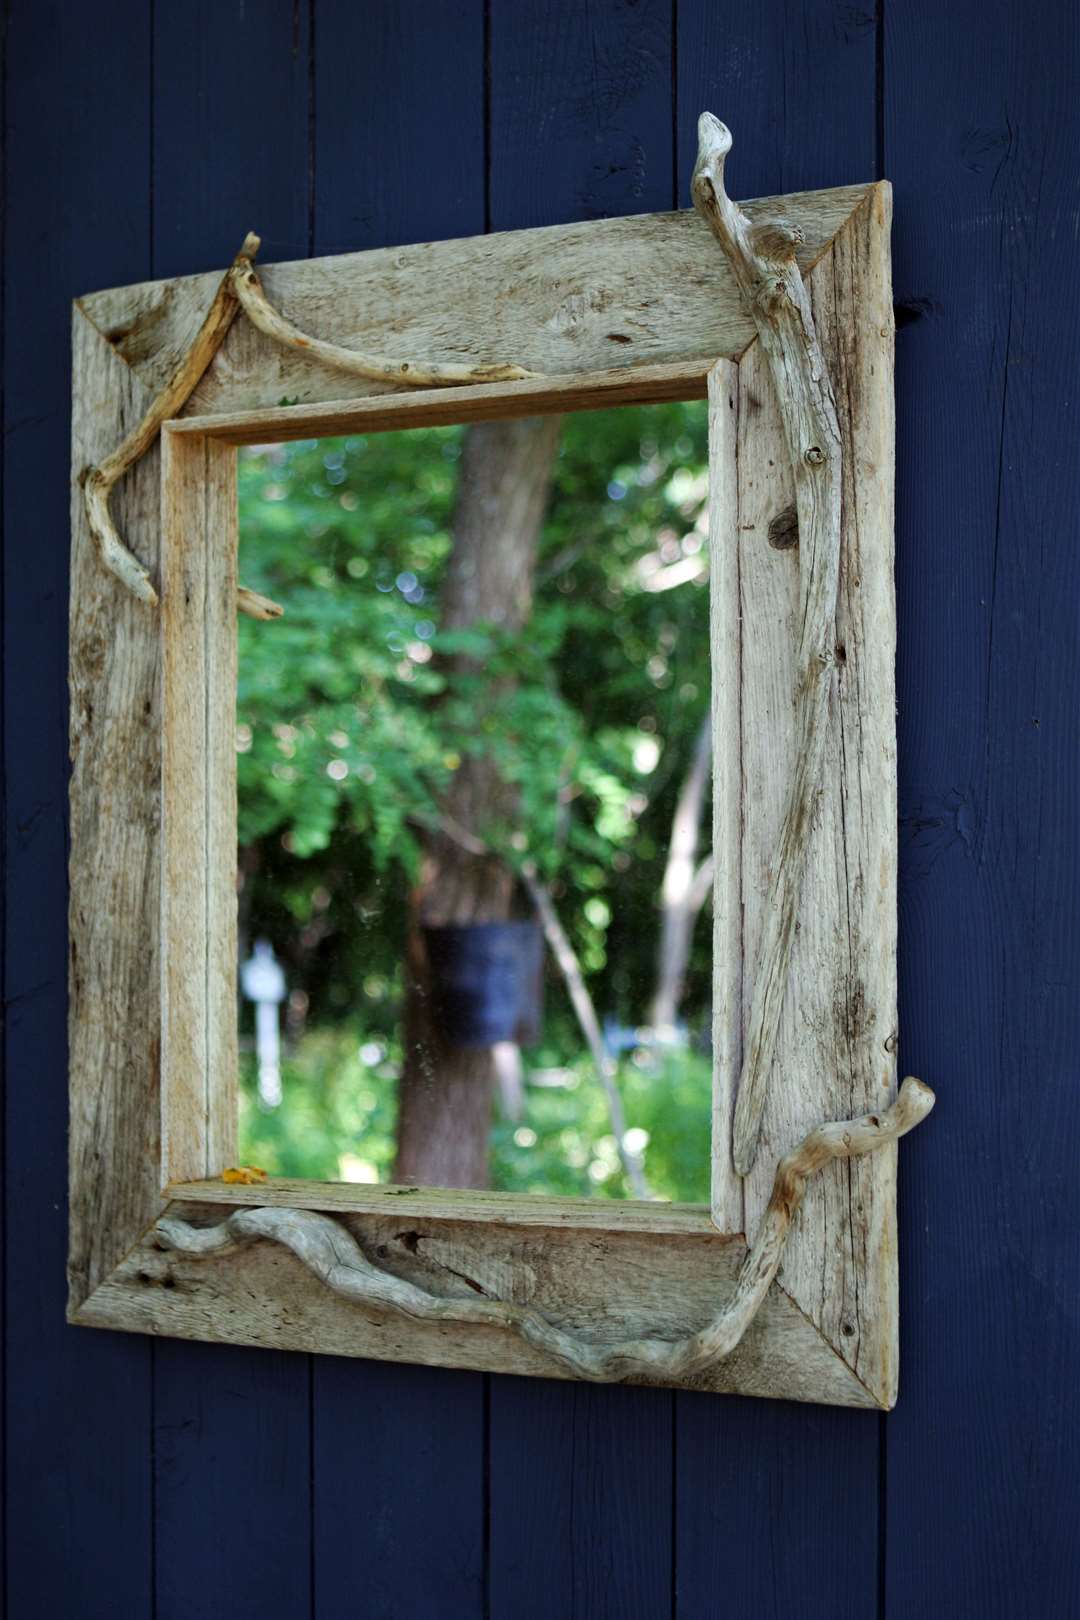 Use mirrors to reflect attractive greenery. Picture: iStock/PA